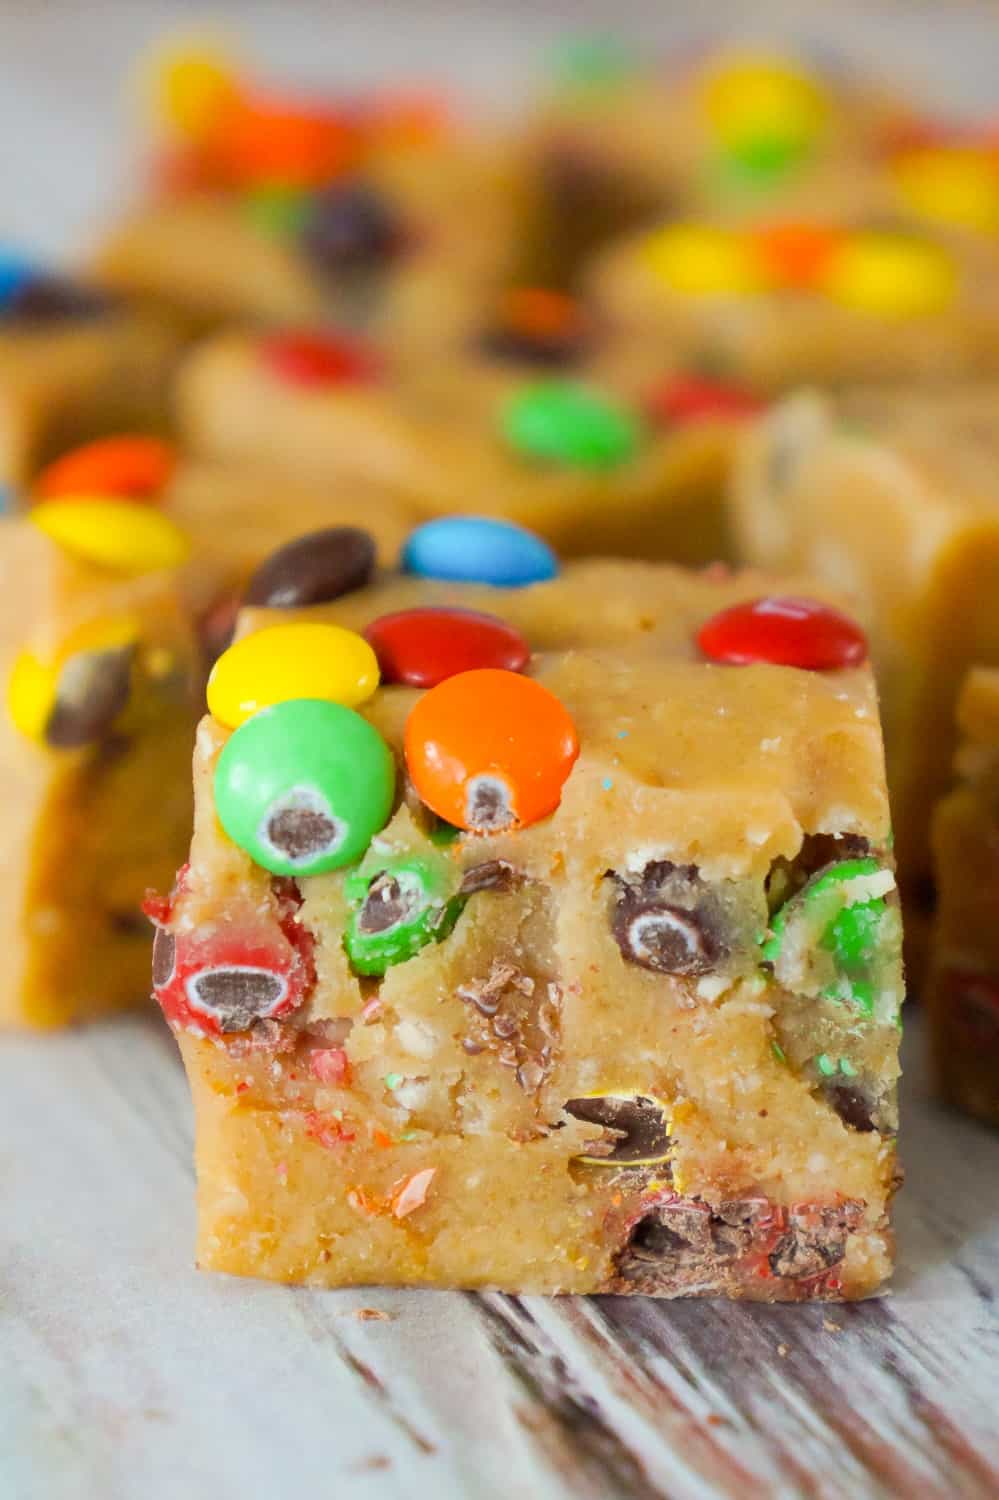 Monster Cookie Dough Fudge is an easy no bake microwave fudge recipe. This creamy fudge is made with peanut butter cookie dough mixed with Reese's peanut butter baking chips and condensed milk.